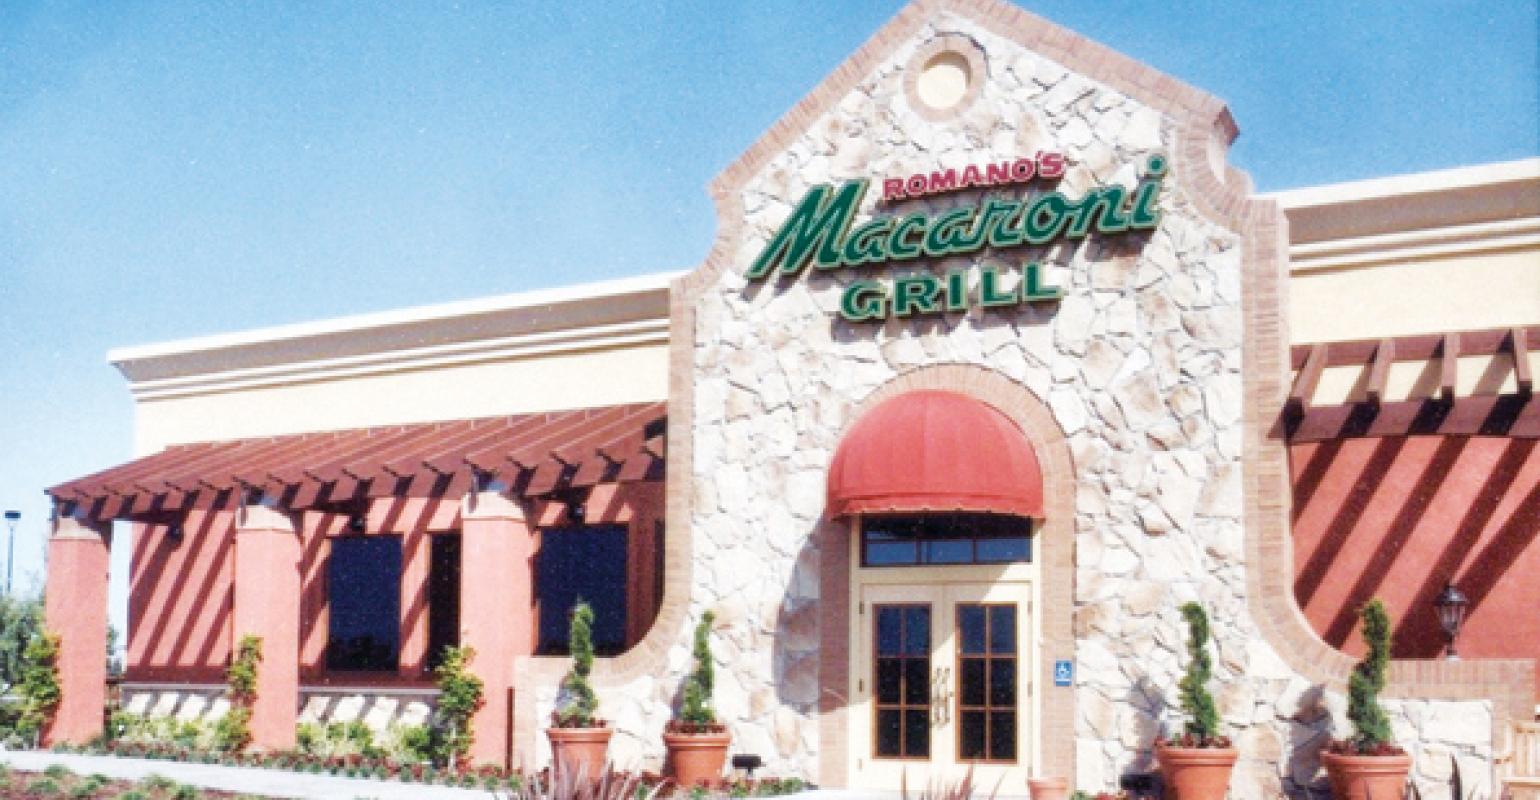 Ignite Restaurant Group Inc. to sell Romano's Macaroni Grill | Nation's